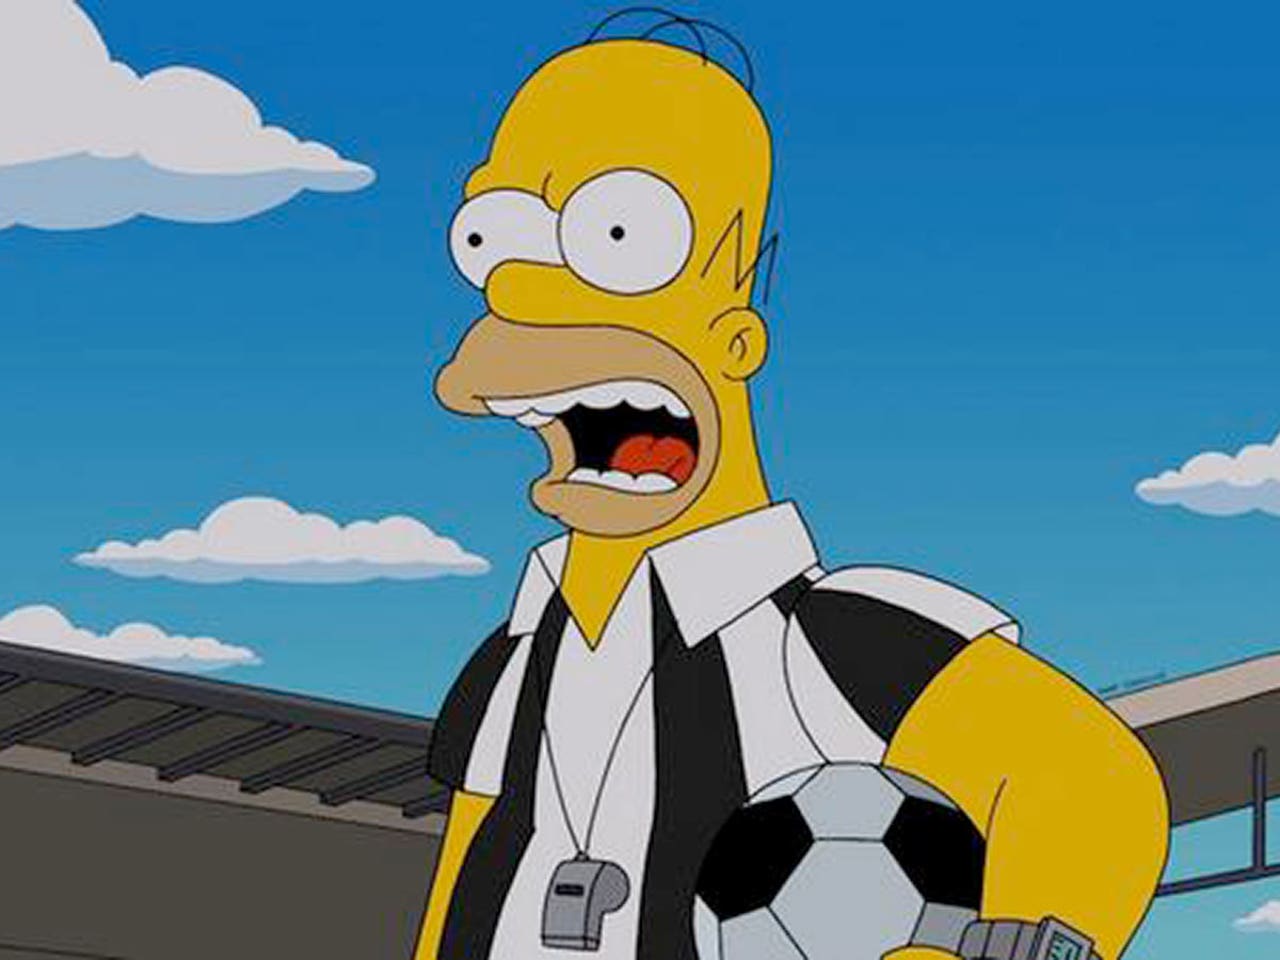 Got soccer fever? Even 'The Simpsons' have jumped on the soccer